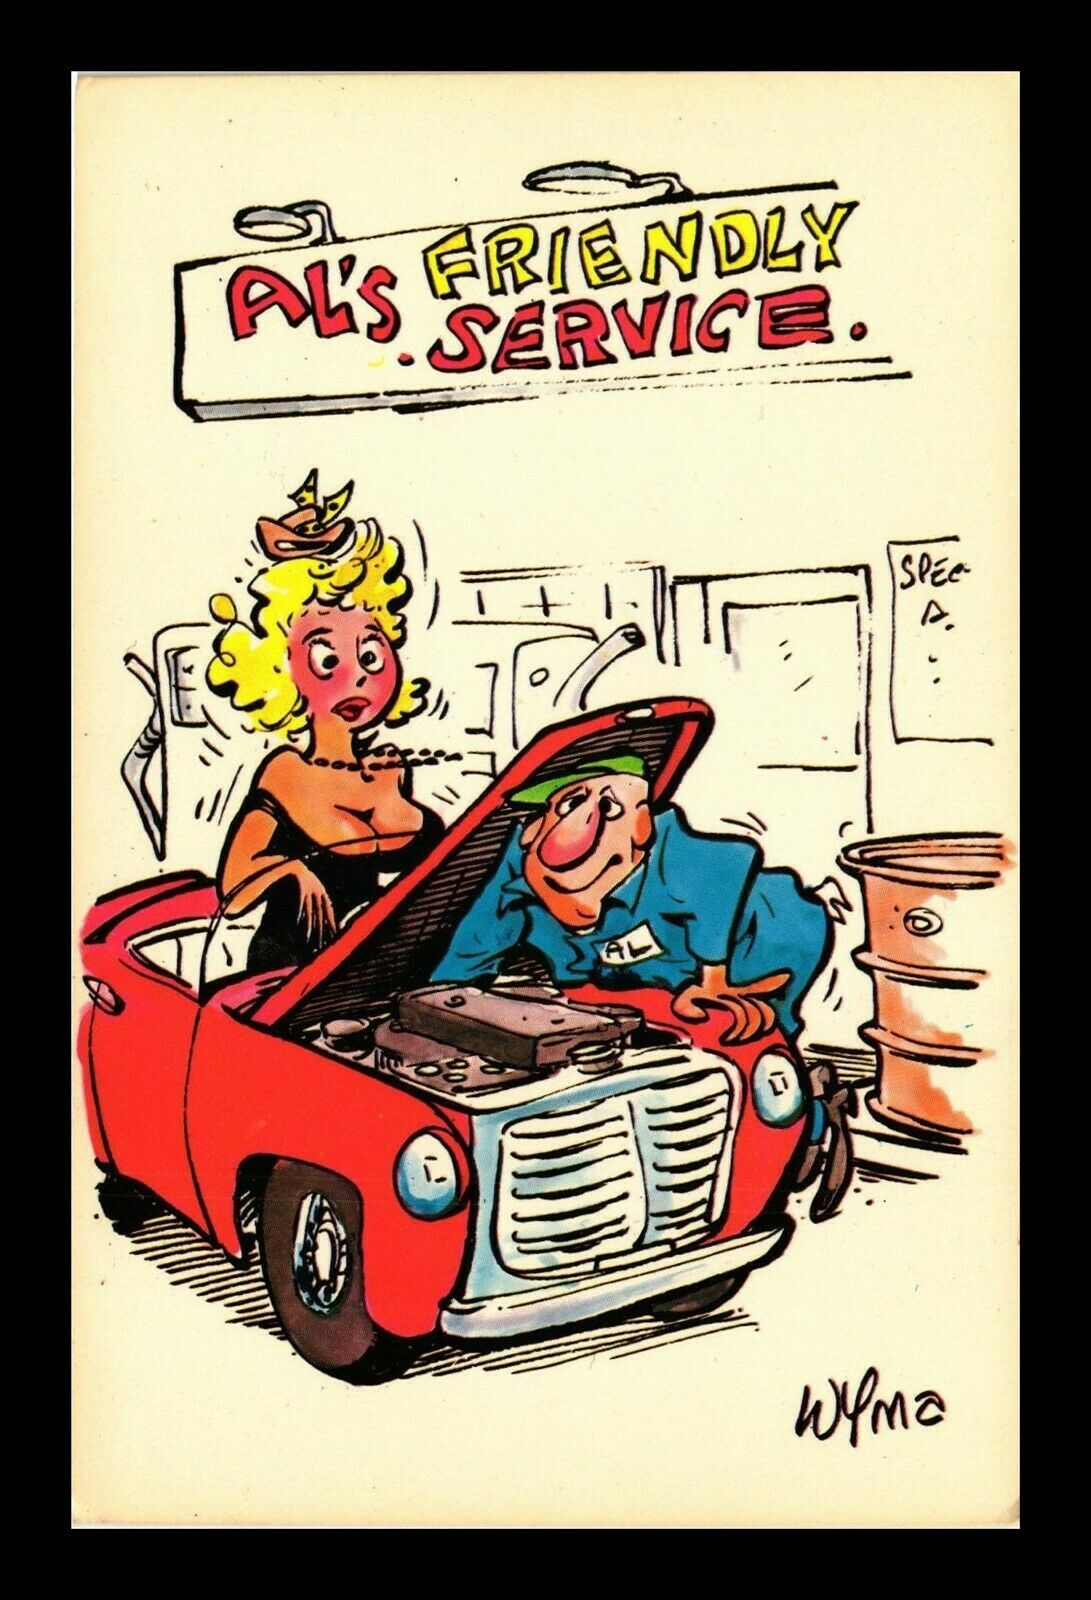 DR JIM STAMPS US ALS FRIENDLY SERVICE TOPICAL COMIC GREETINGS POSTCARD